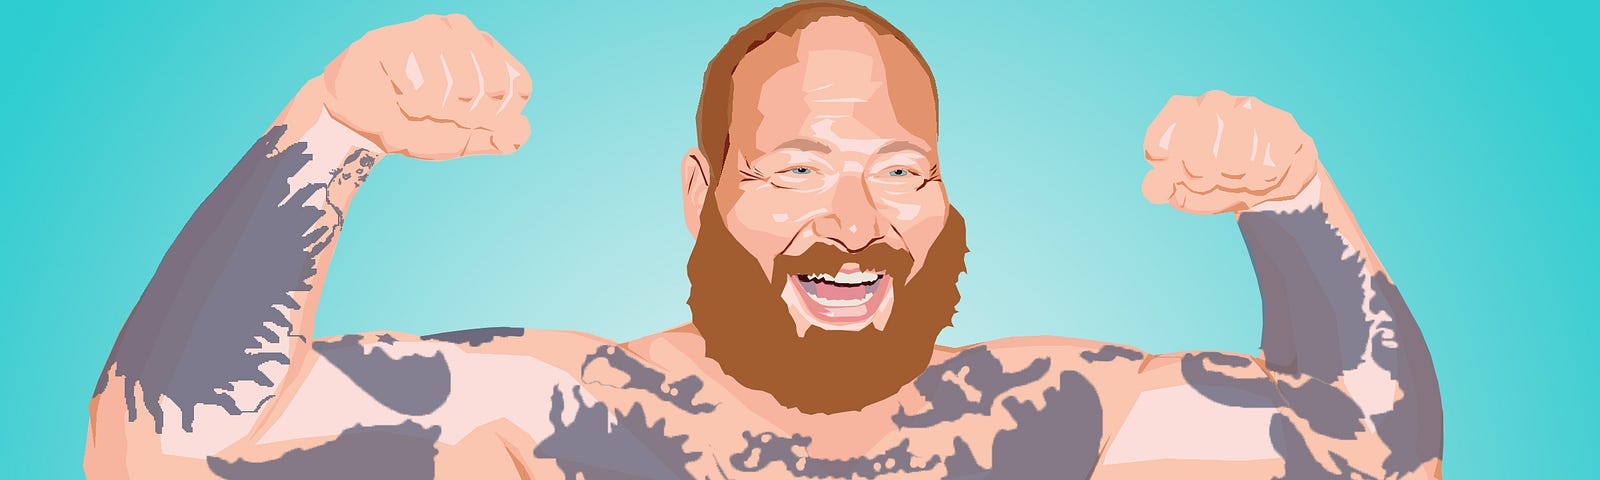 Action Bronson flexing with tattoos, artwork for album review of Well Done